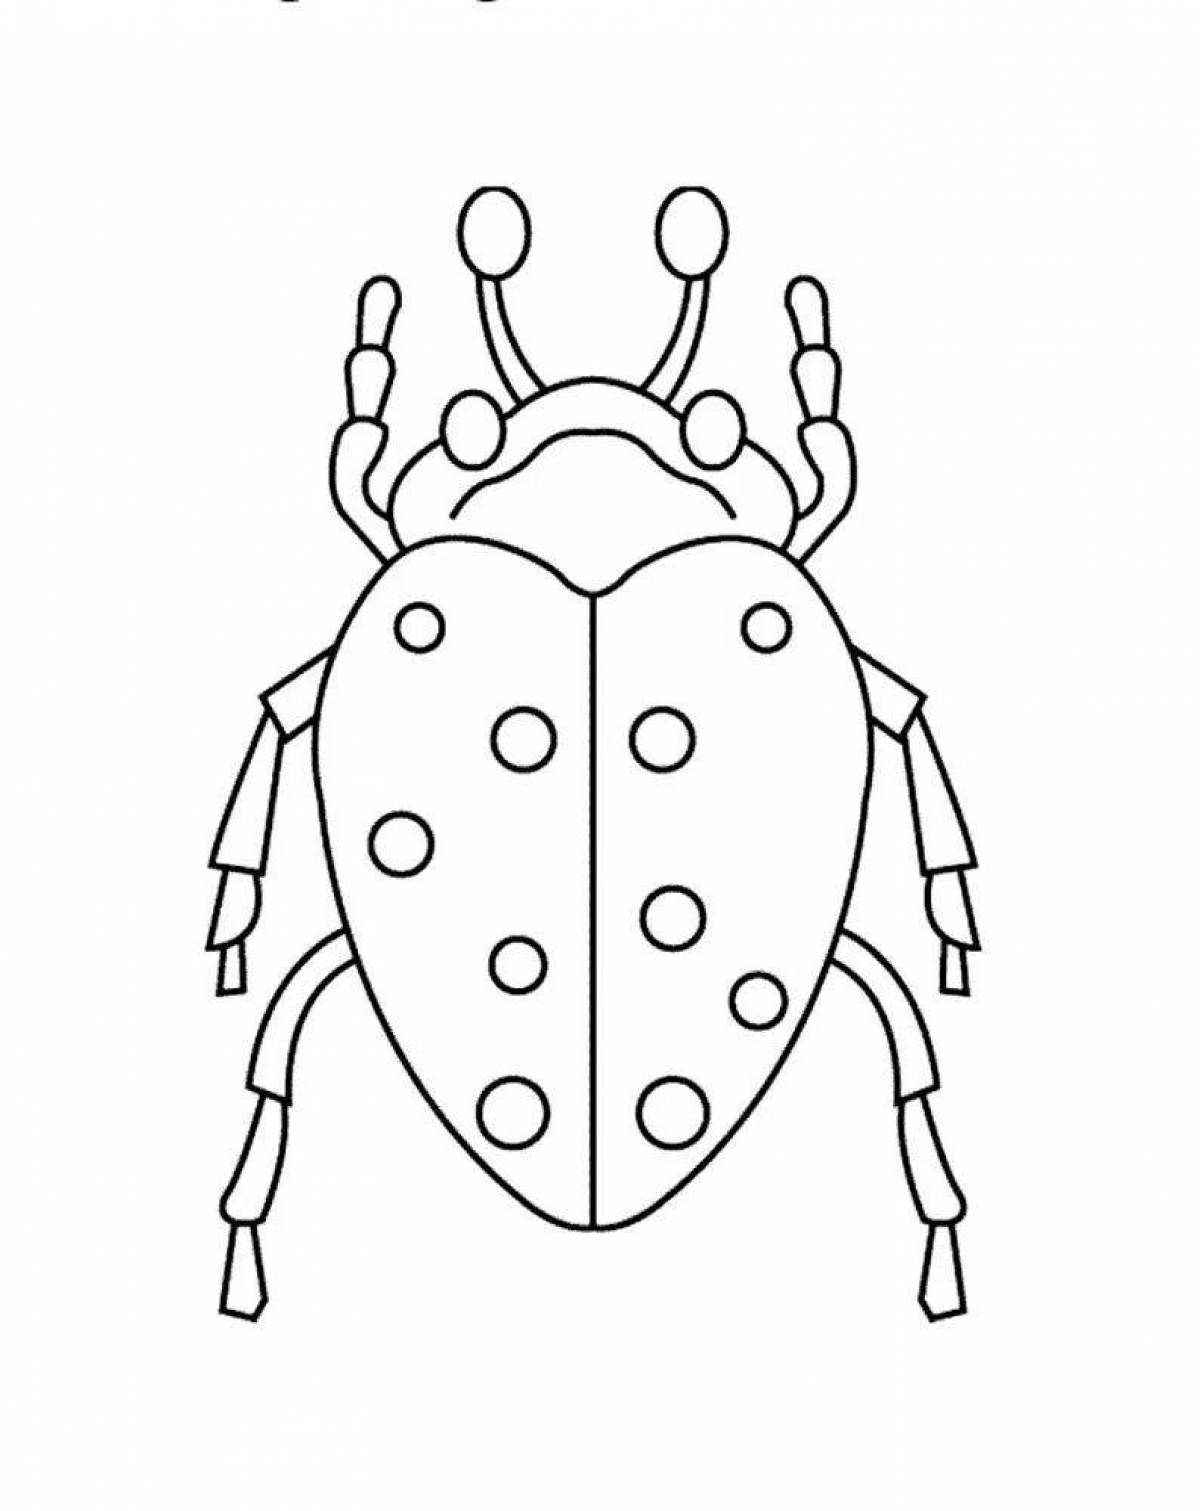 Beetle picture for kids #3